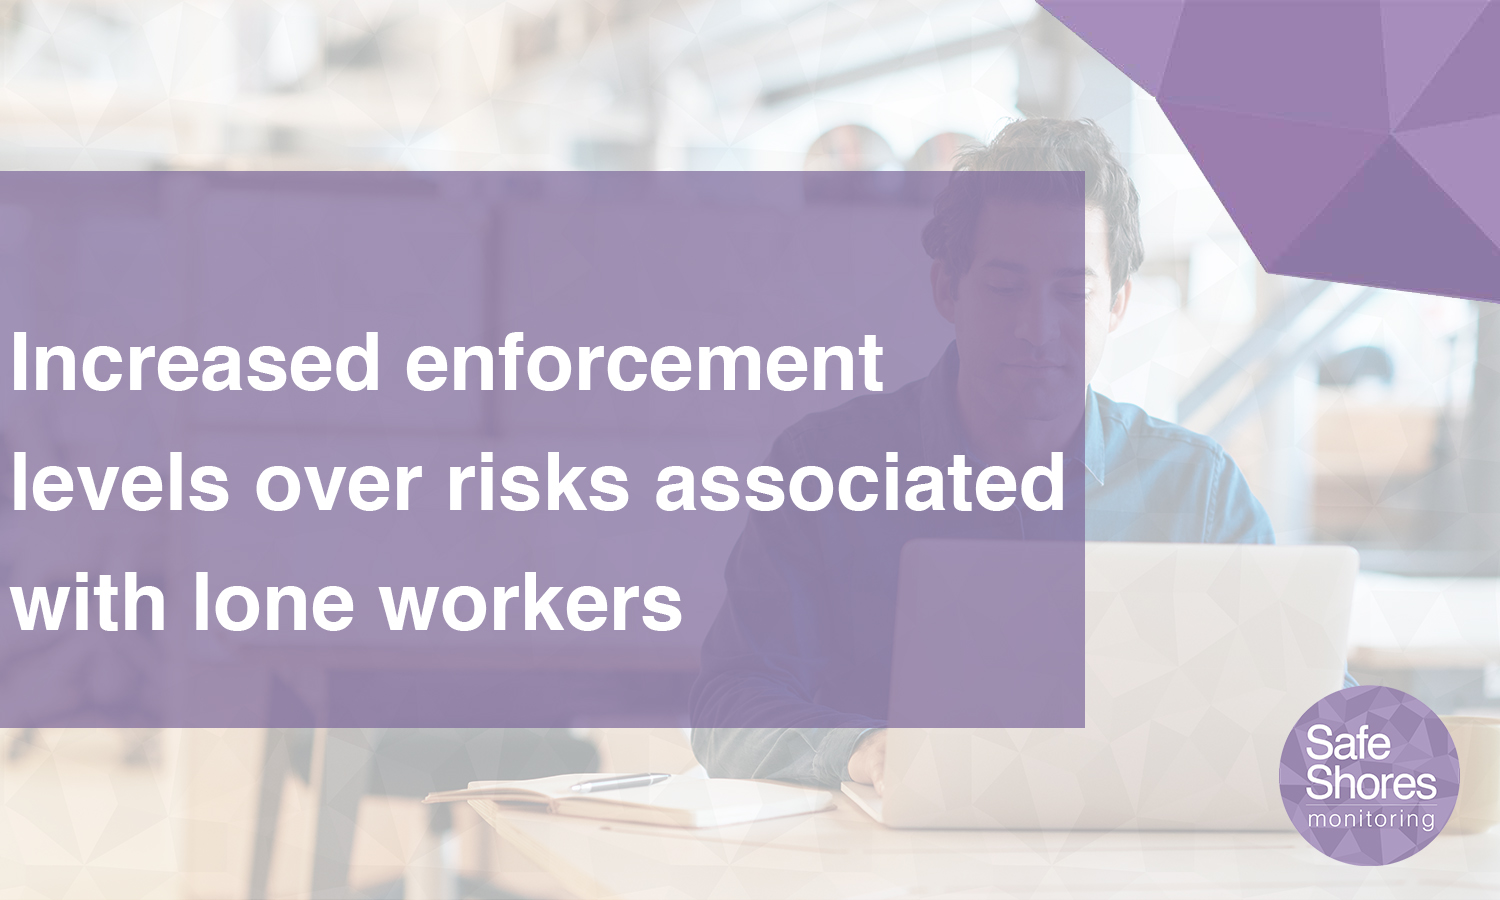 Increased enforcement levels over lone workers risks